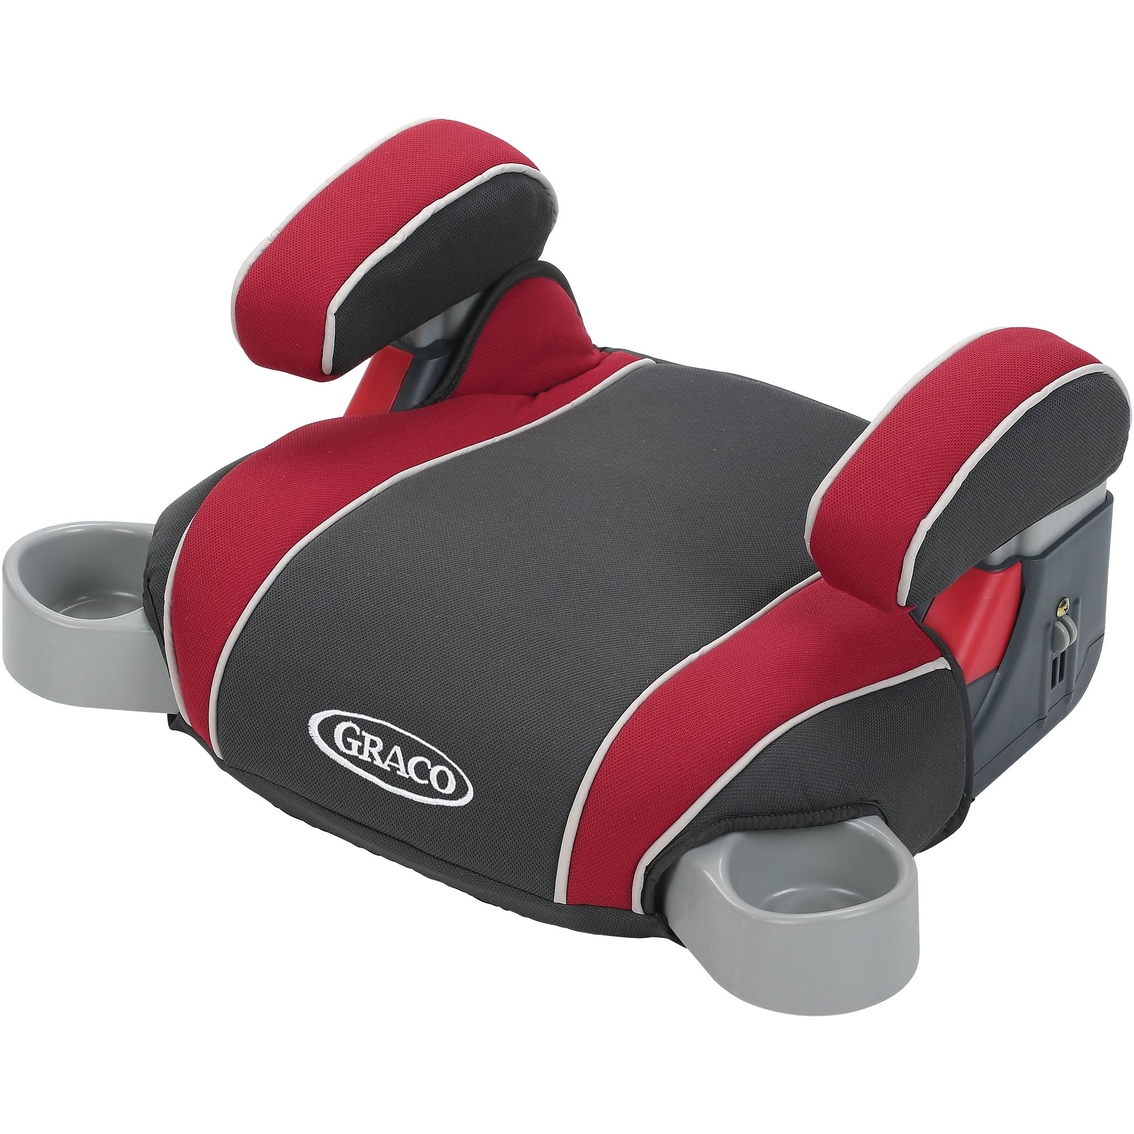 Booster Seat Toys 20